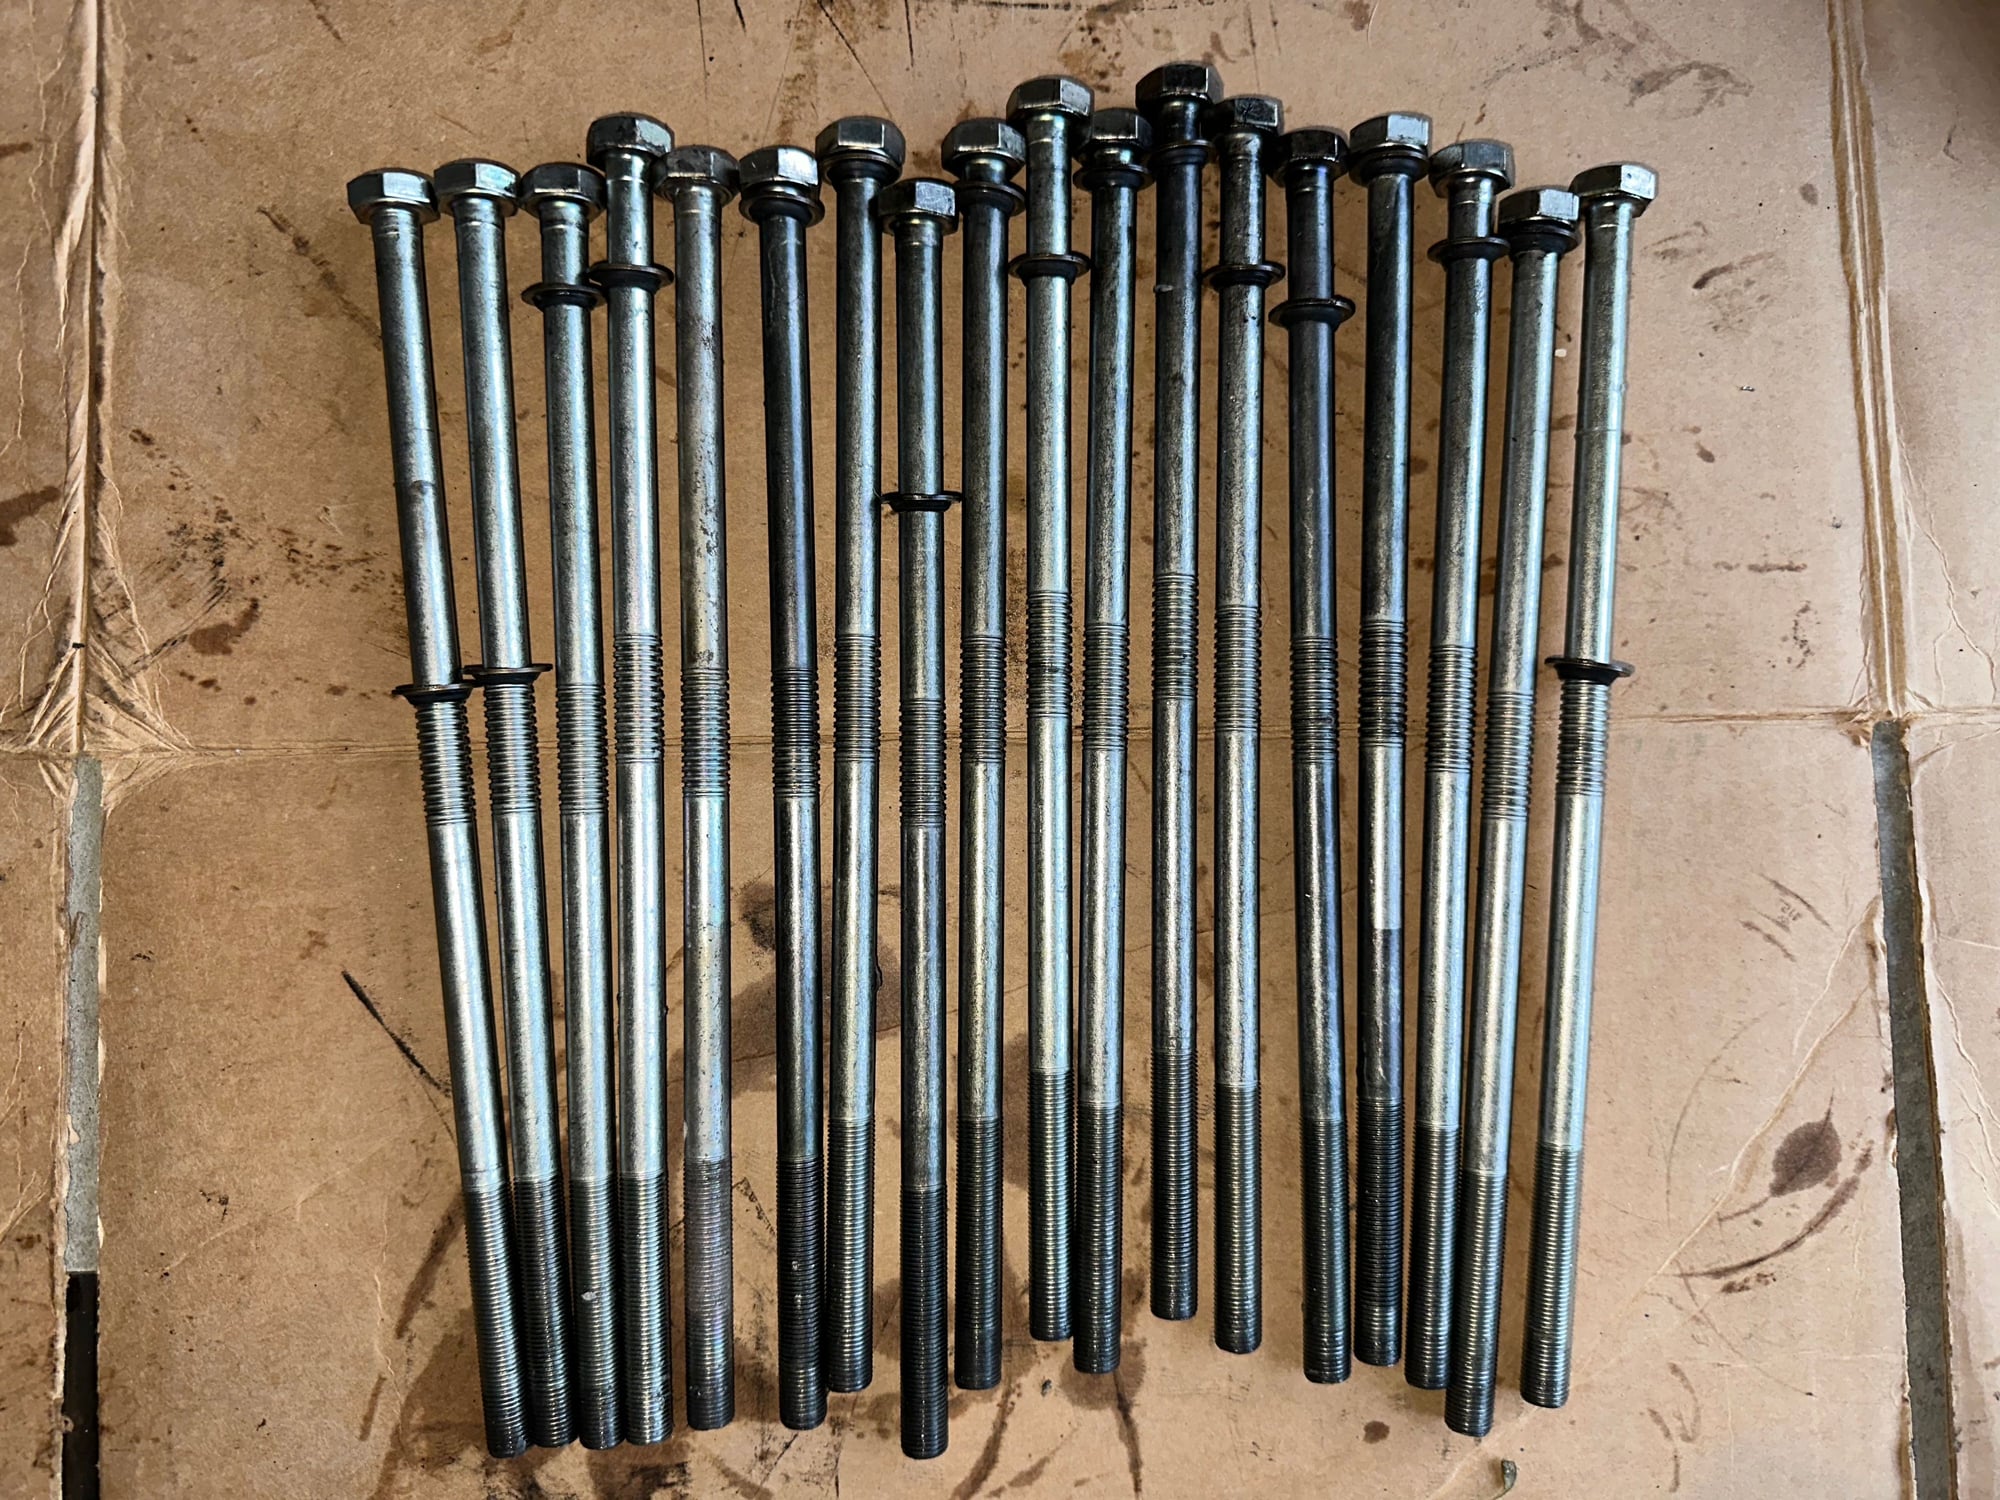 1994 Mazda RX-7 - 18 long bolts - Accessories - $150 - Palmdale, CA 93551, United States